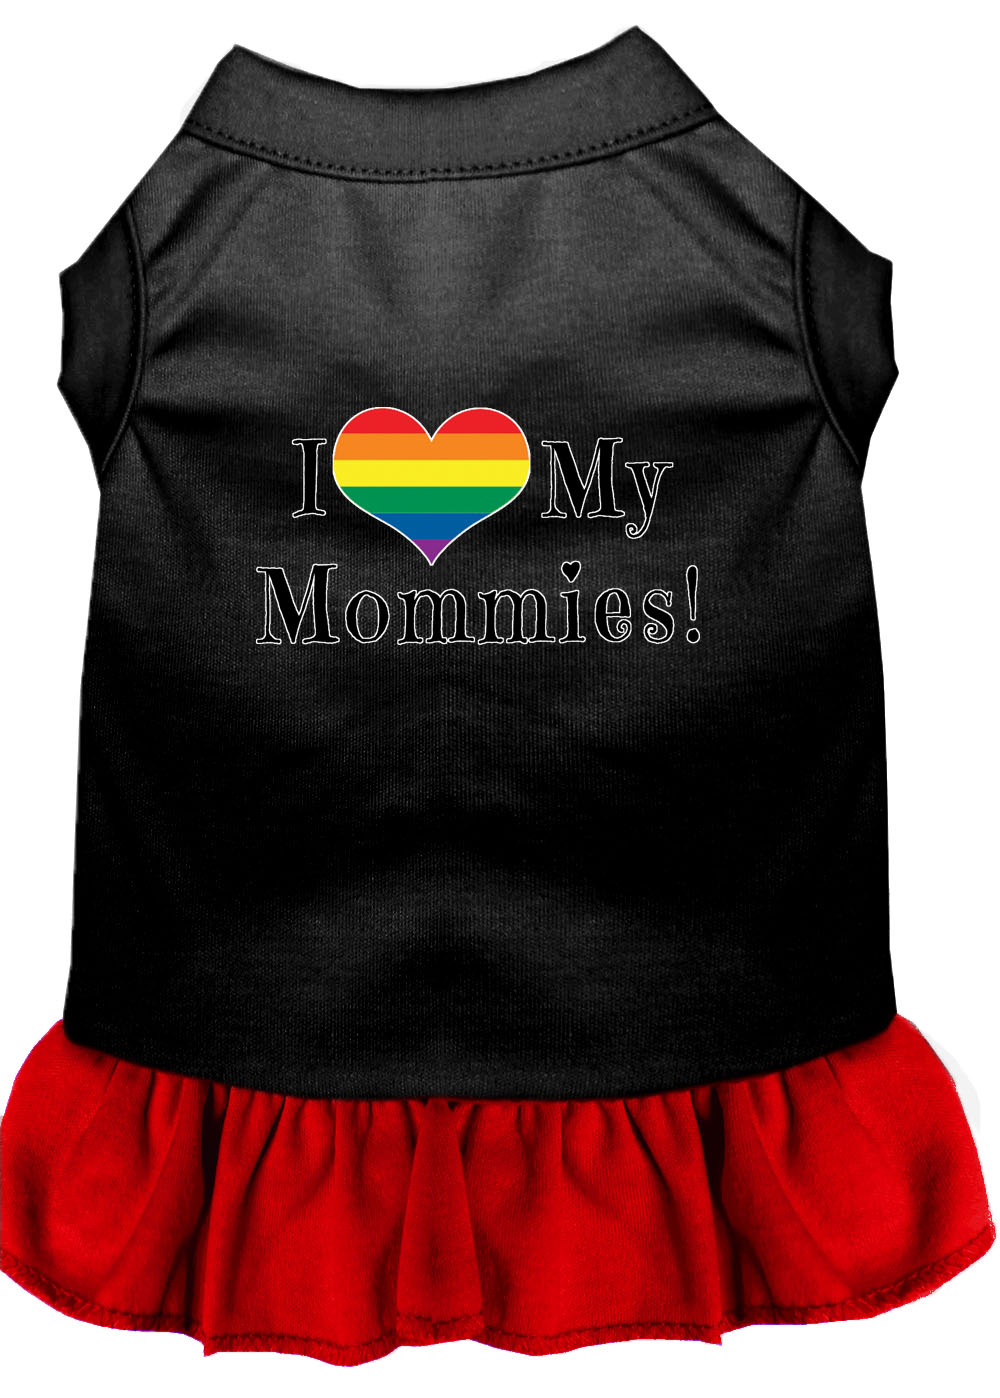 I Heart my Mommies Screen Print Dog Dress Black with Red XL